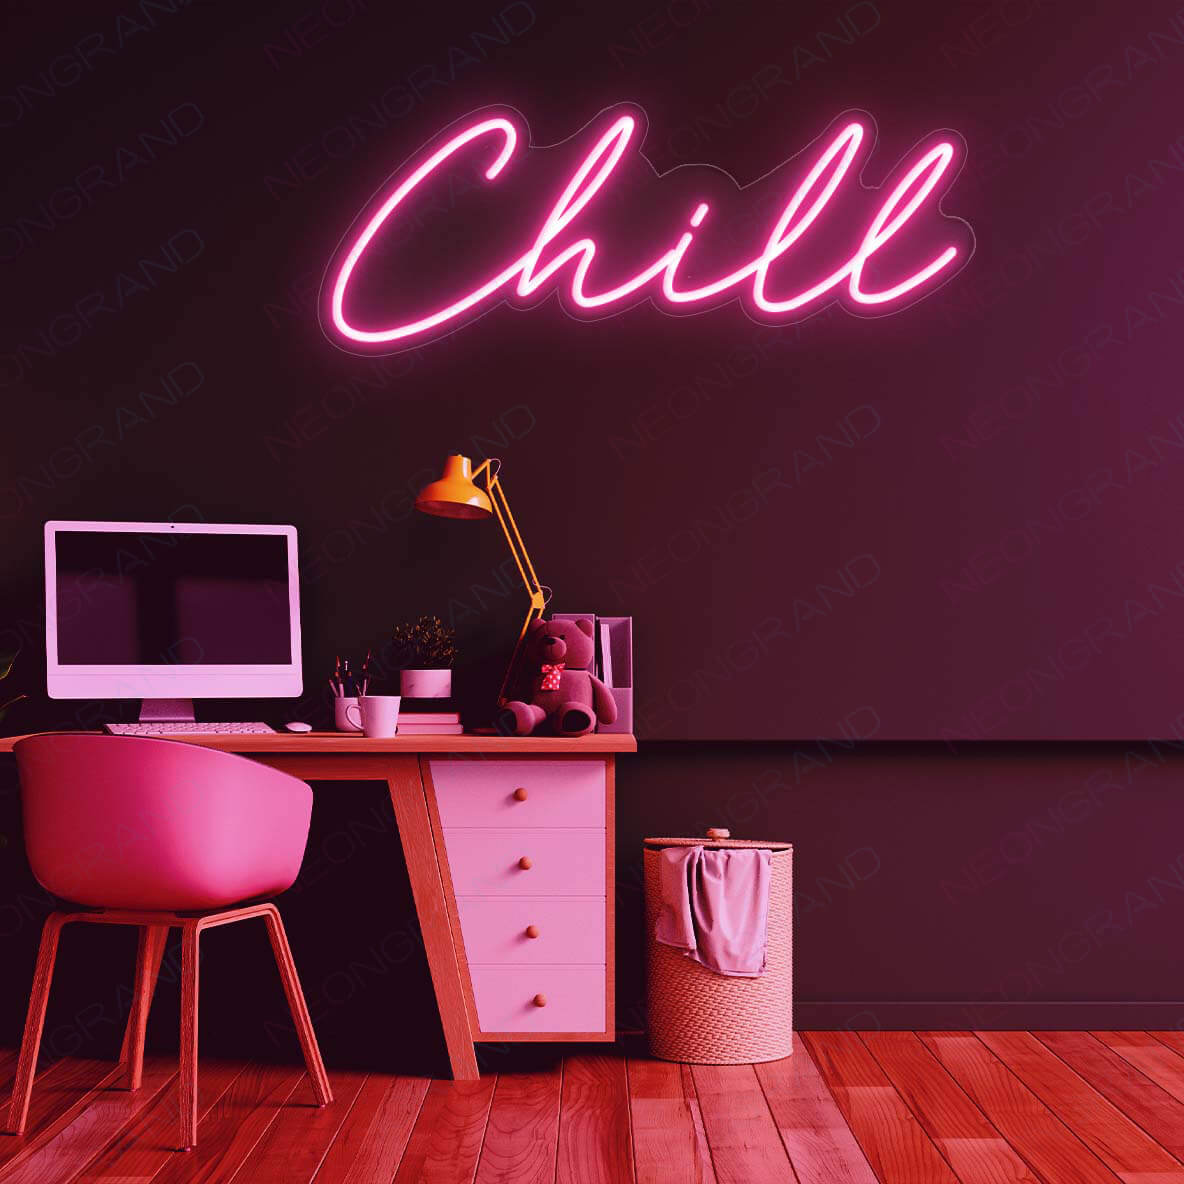 Chill Neon Sign Led Light pink